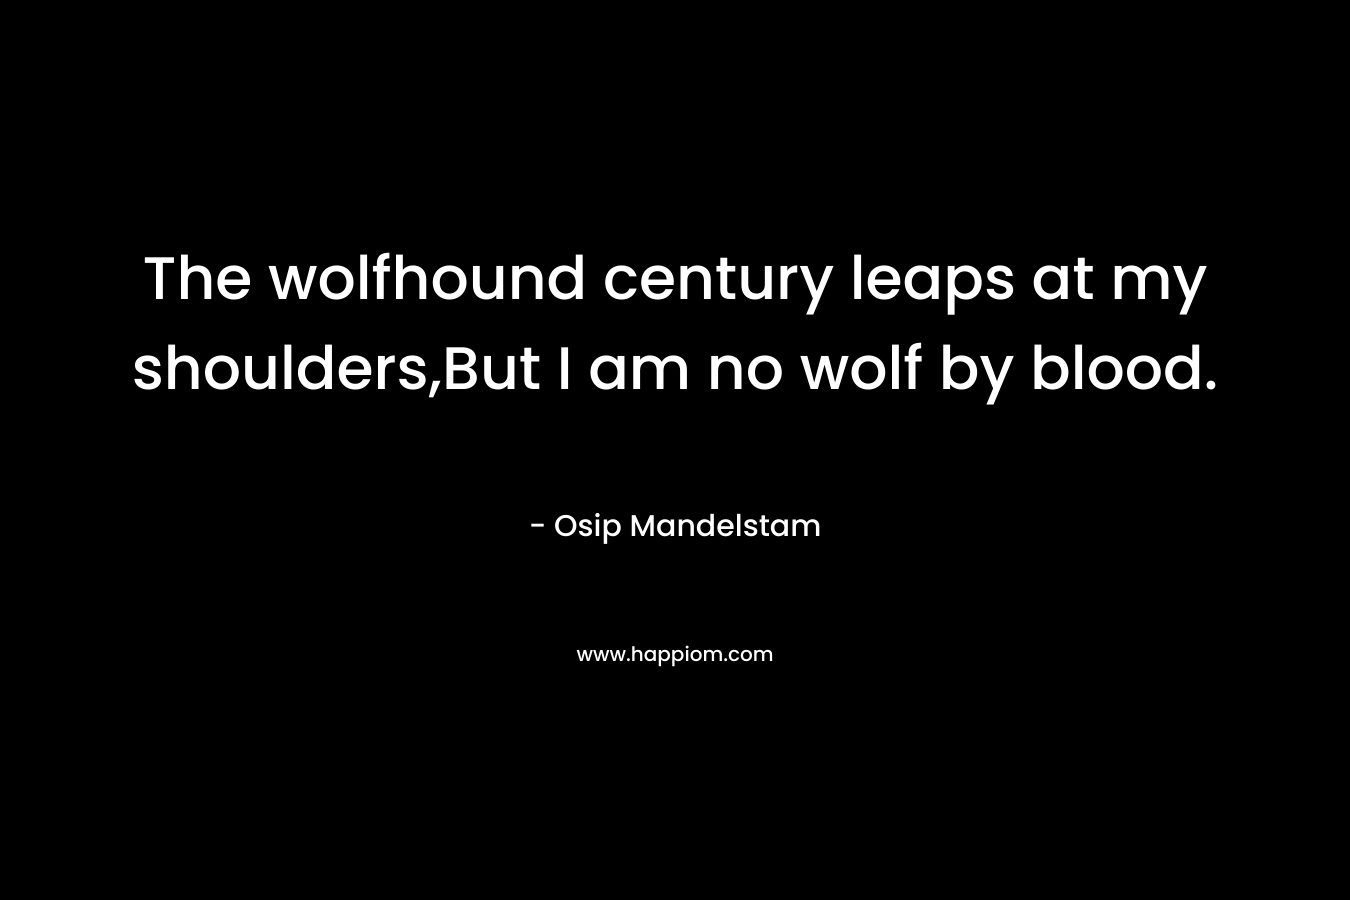 The wolfhound century leaps at my shoulders,But I am no wolf by blood. – Osip Mandelstam